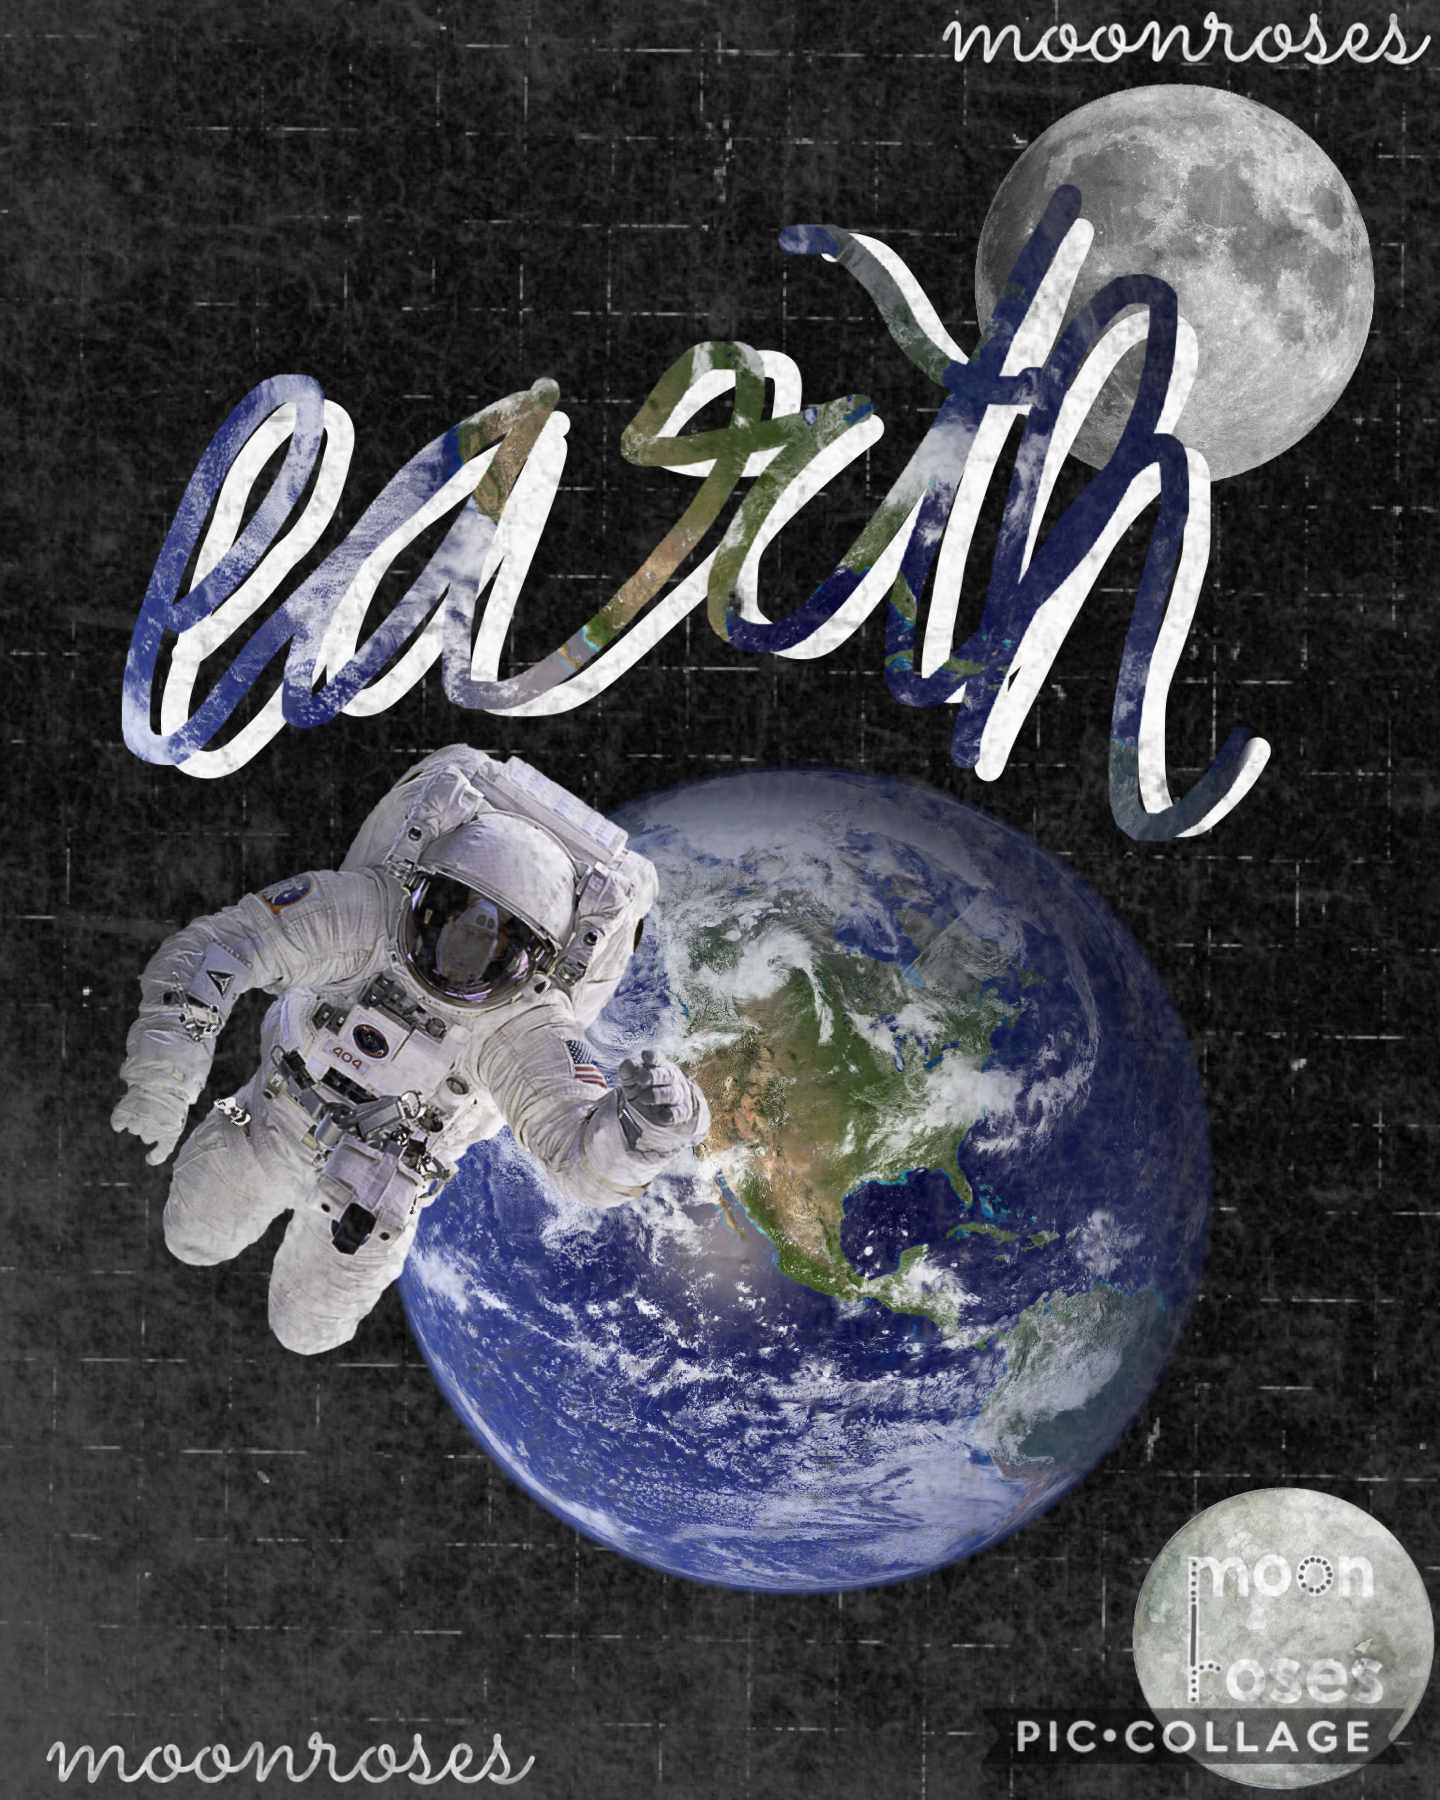 Tap
Starting out my space theme with a earth collage!
What do you think? Let me know!